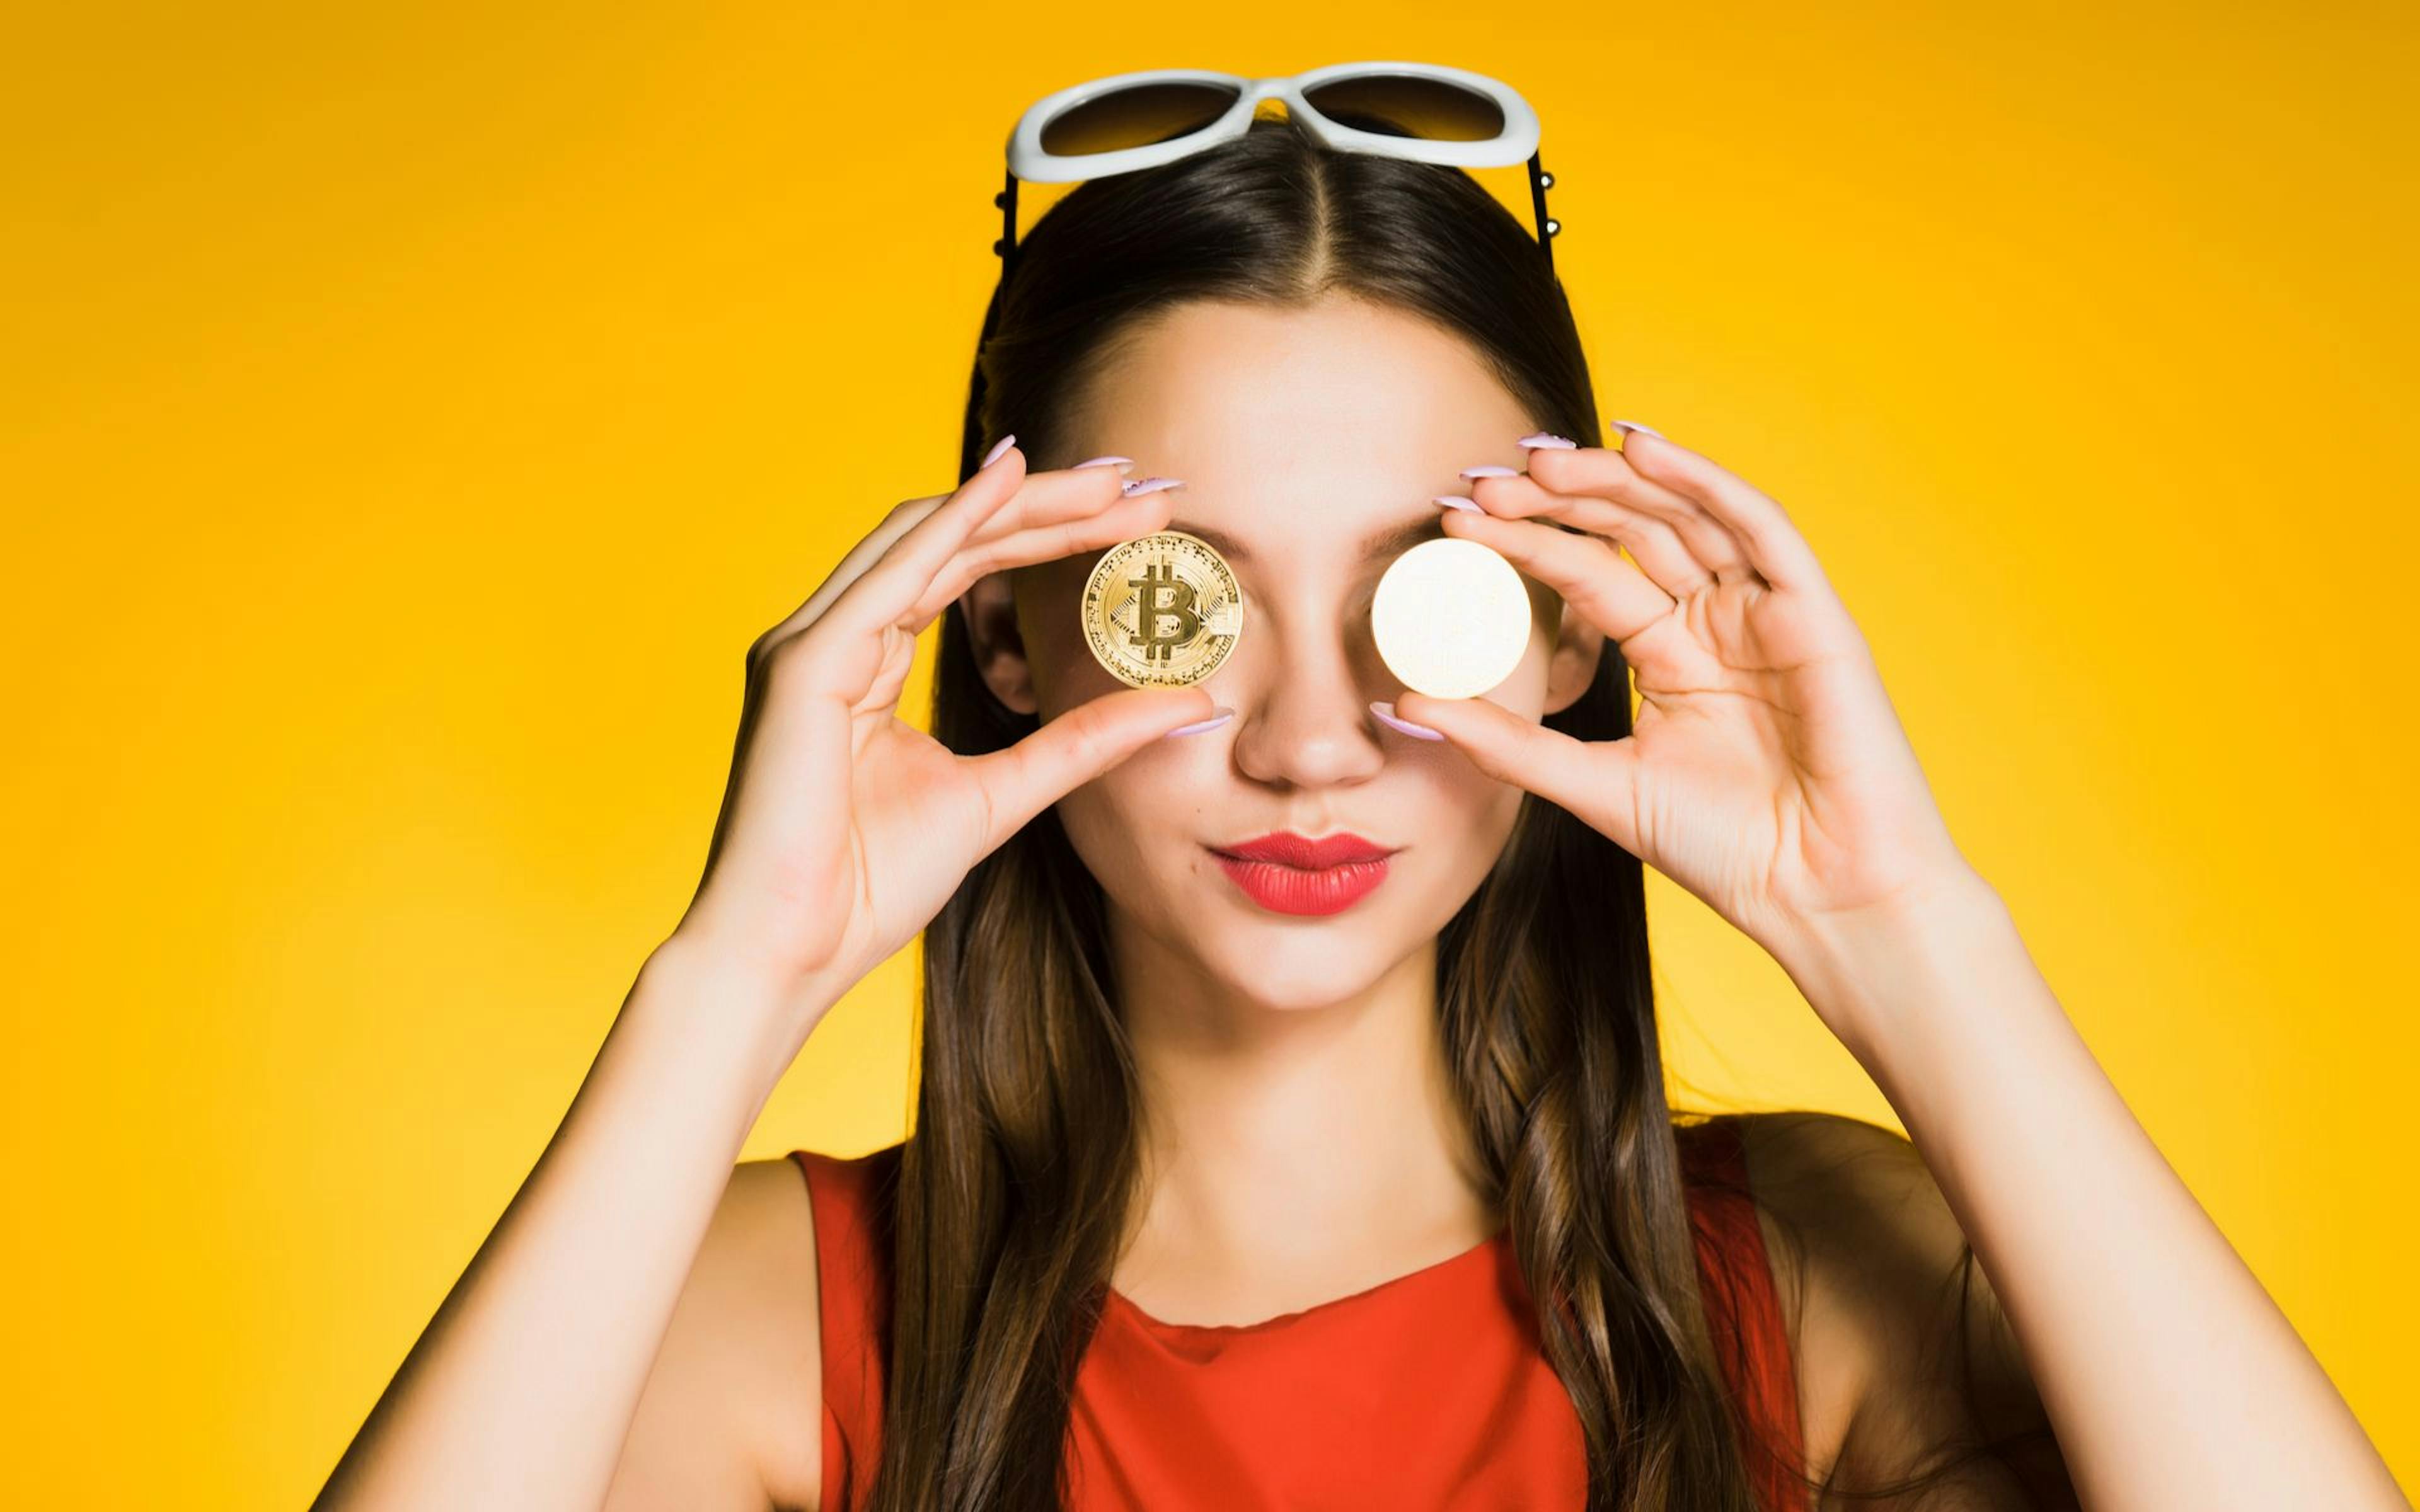 featured image - Financial Freedom Attracts Women to Crypto